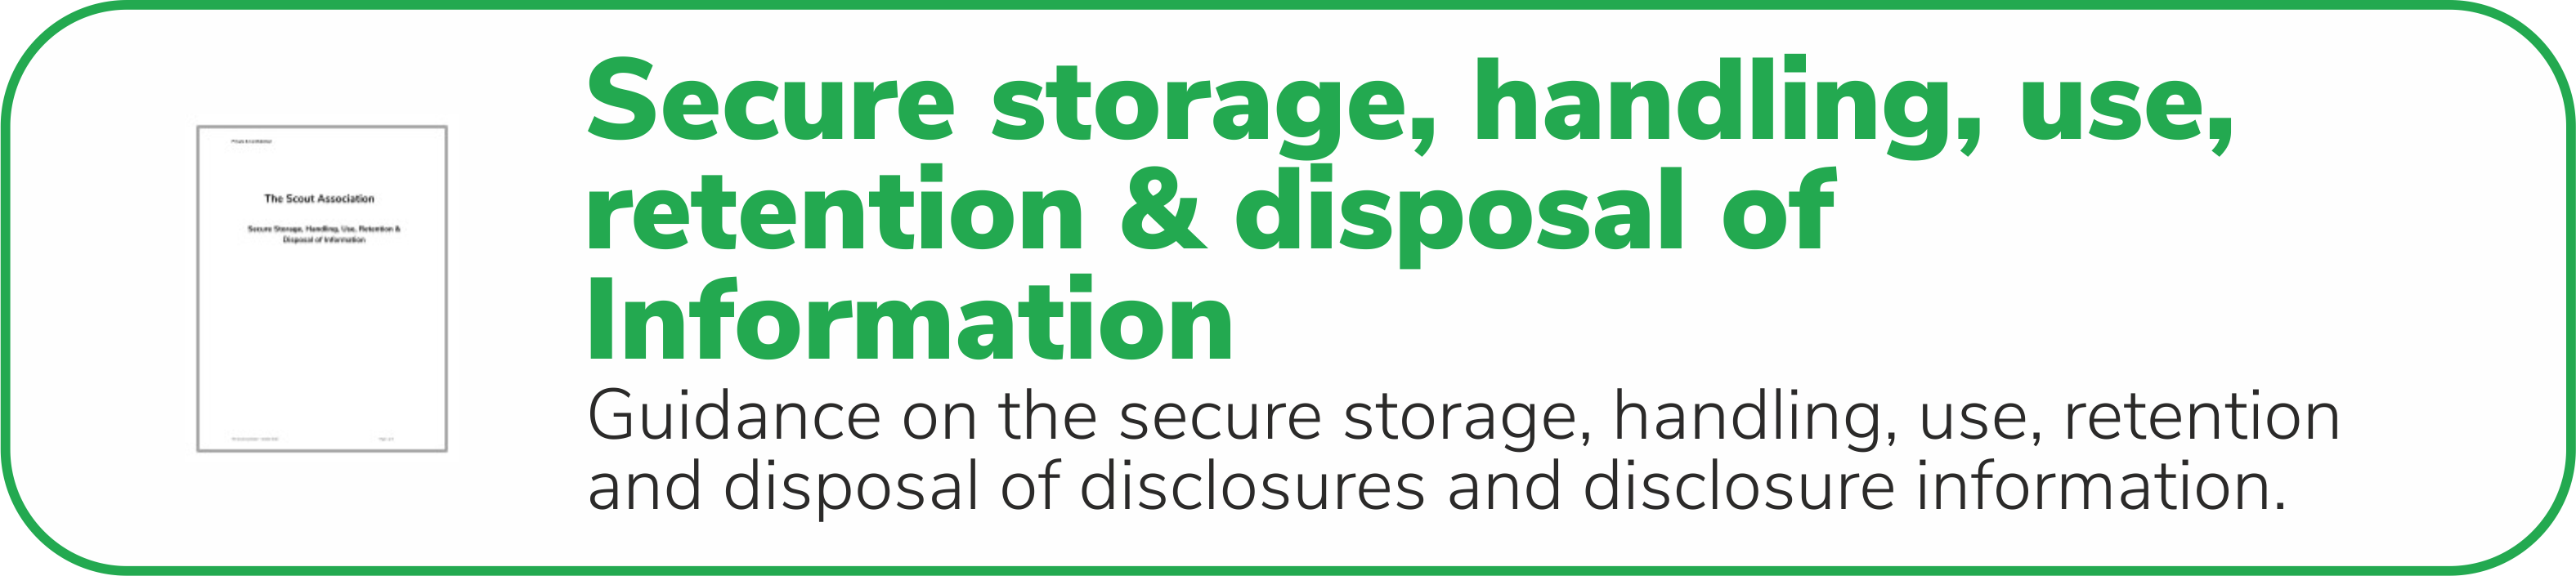 Guidance on the secure storage, handling, use, retention and disposal of disclosures and disclosure information.